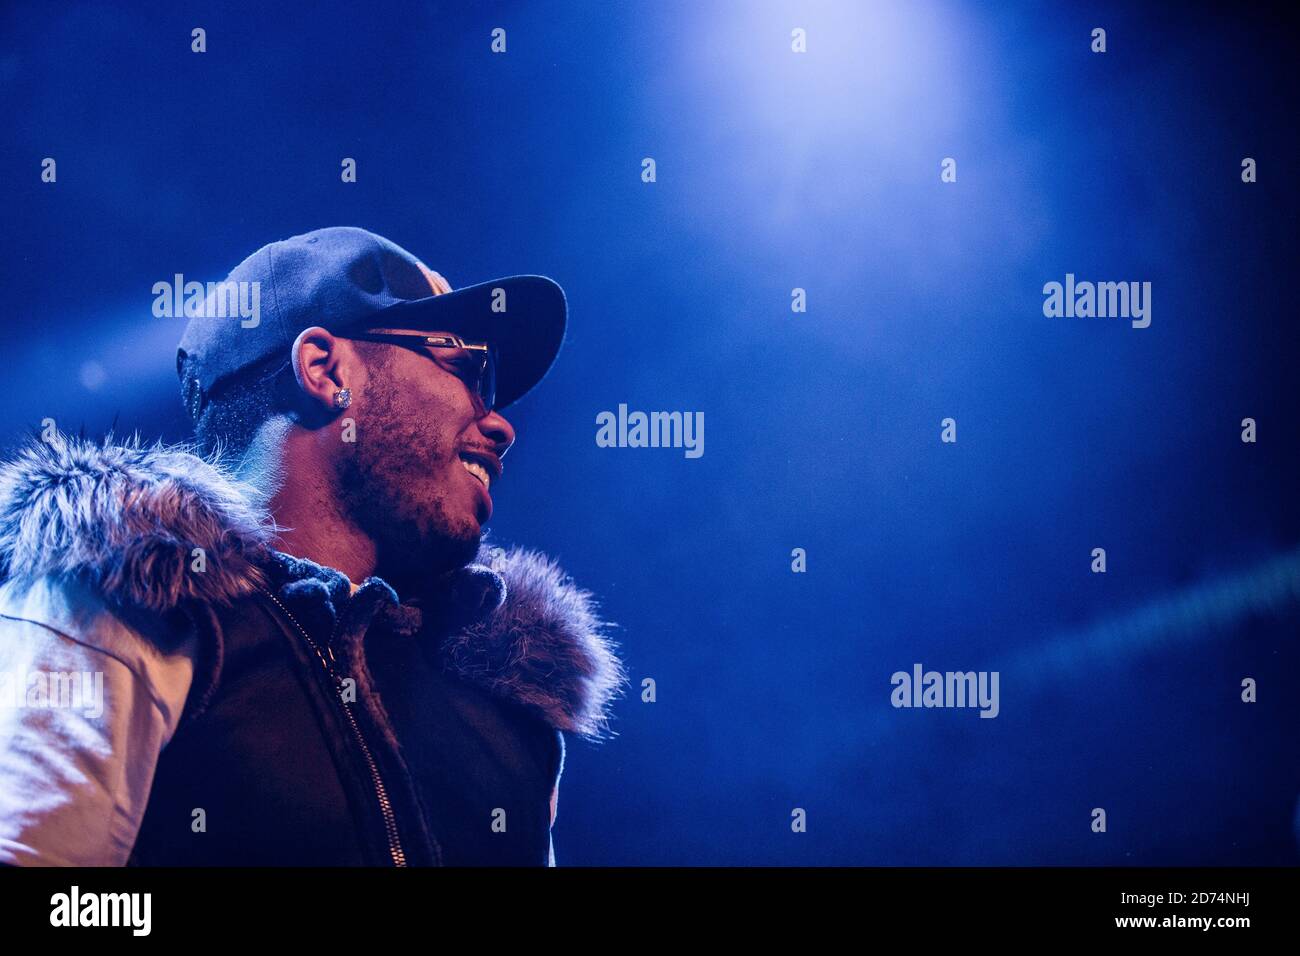 Kolding, Denmark. 27th, May 2016. The rapper, singer and lyricist Nelly performs a live concert at Godset in Kolding. (Photo credit: Gonzales Photo - Lasse Lagoni Stock Photo - Alamy